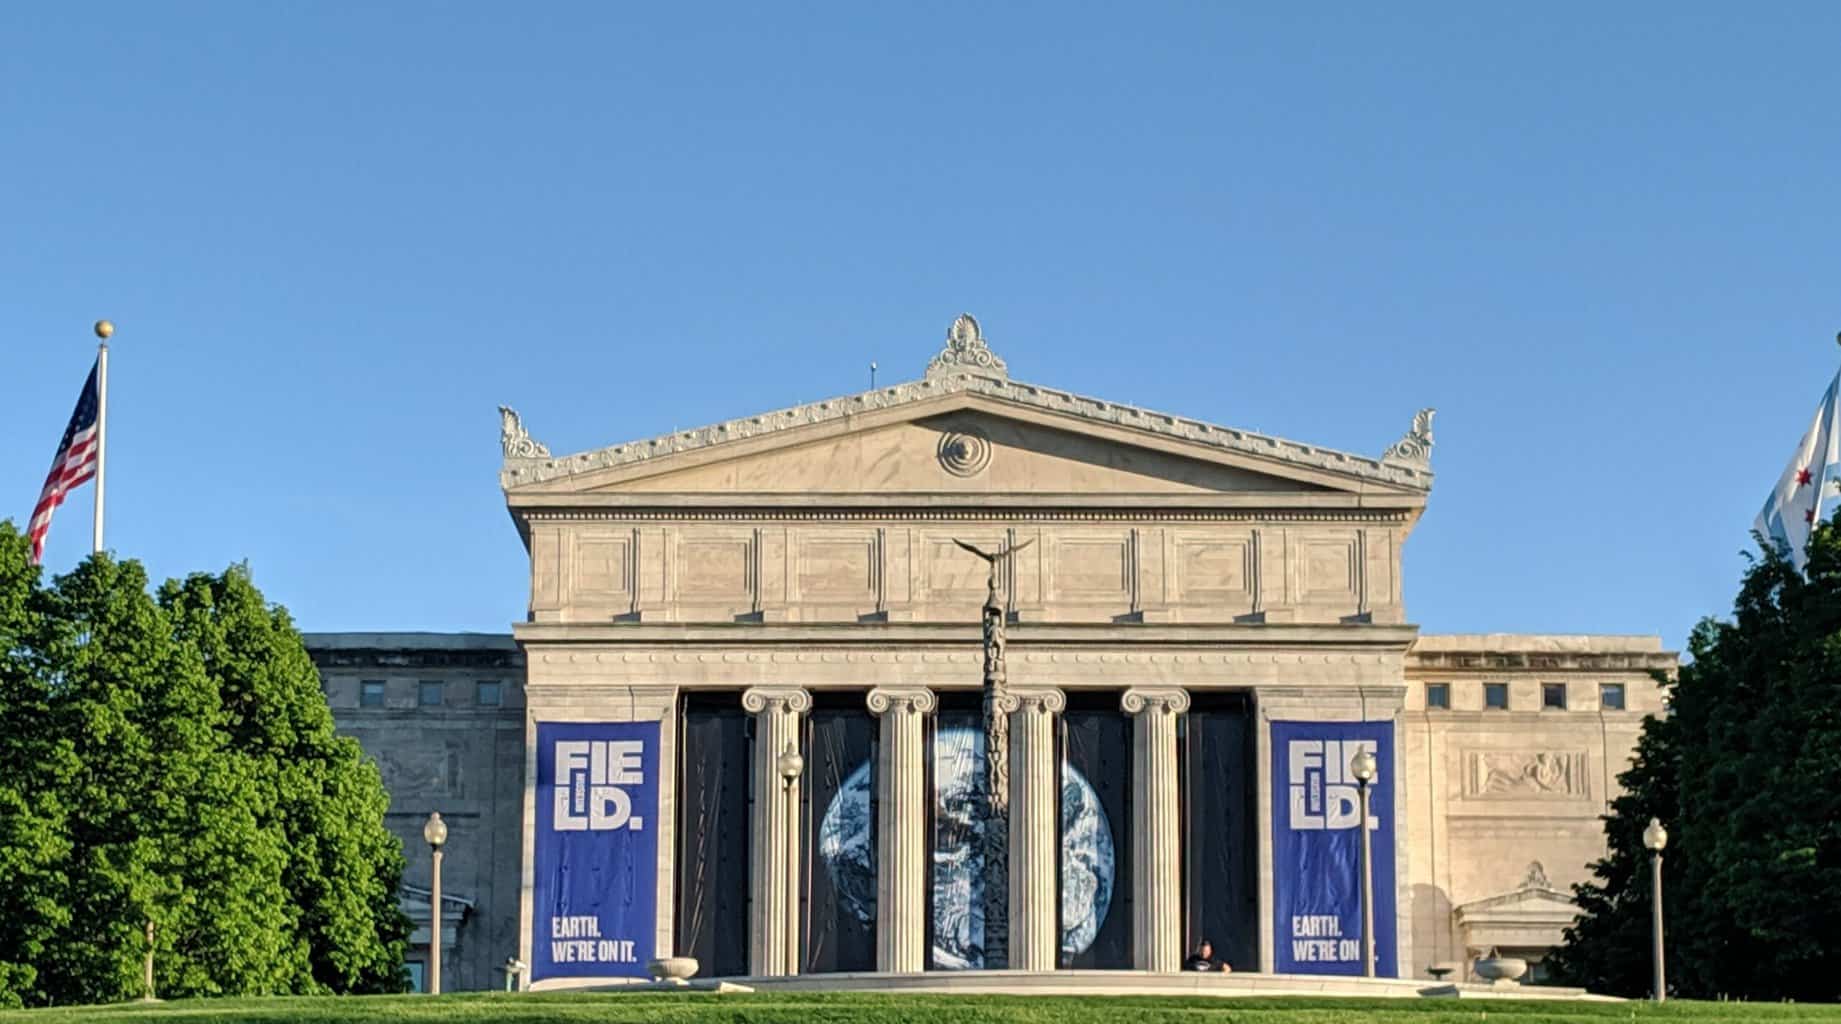 Museums in Chicago - Field Museum